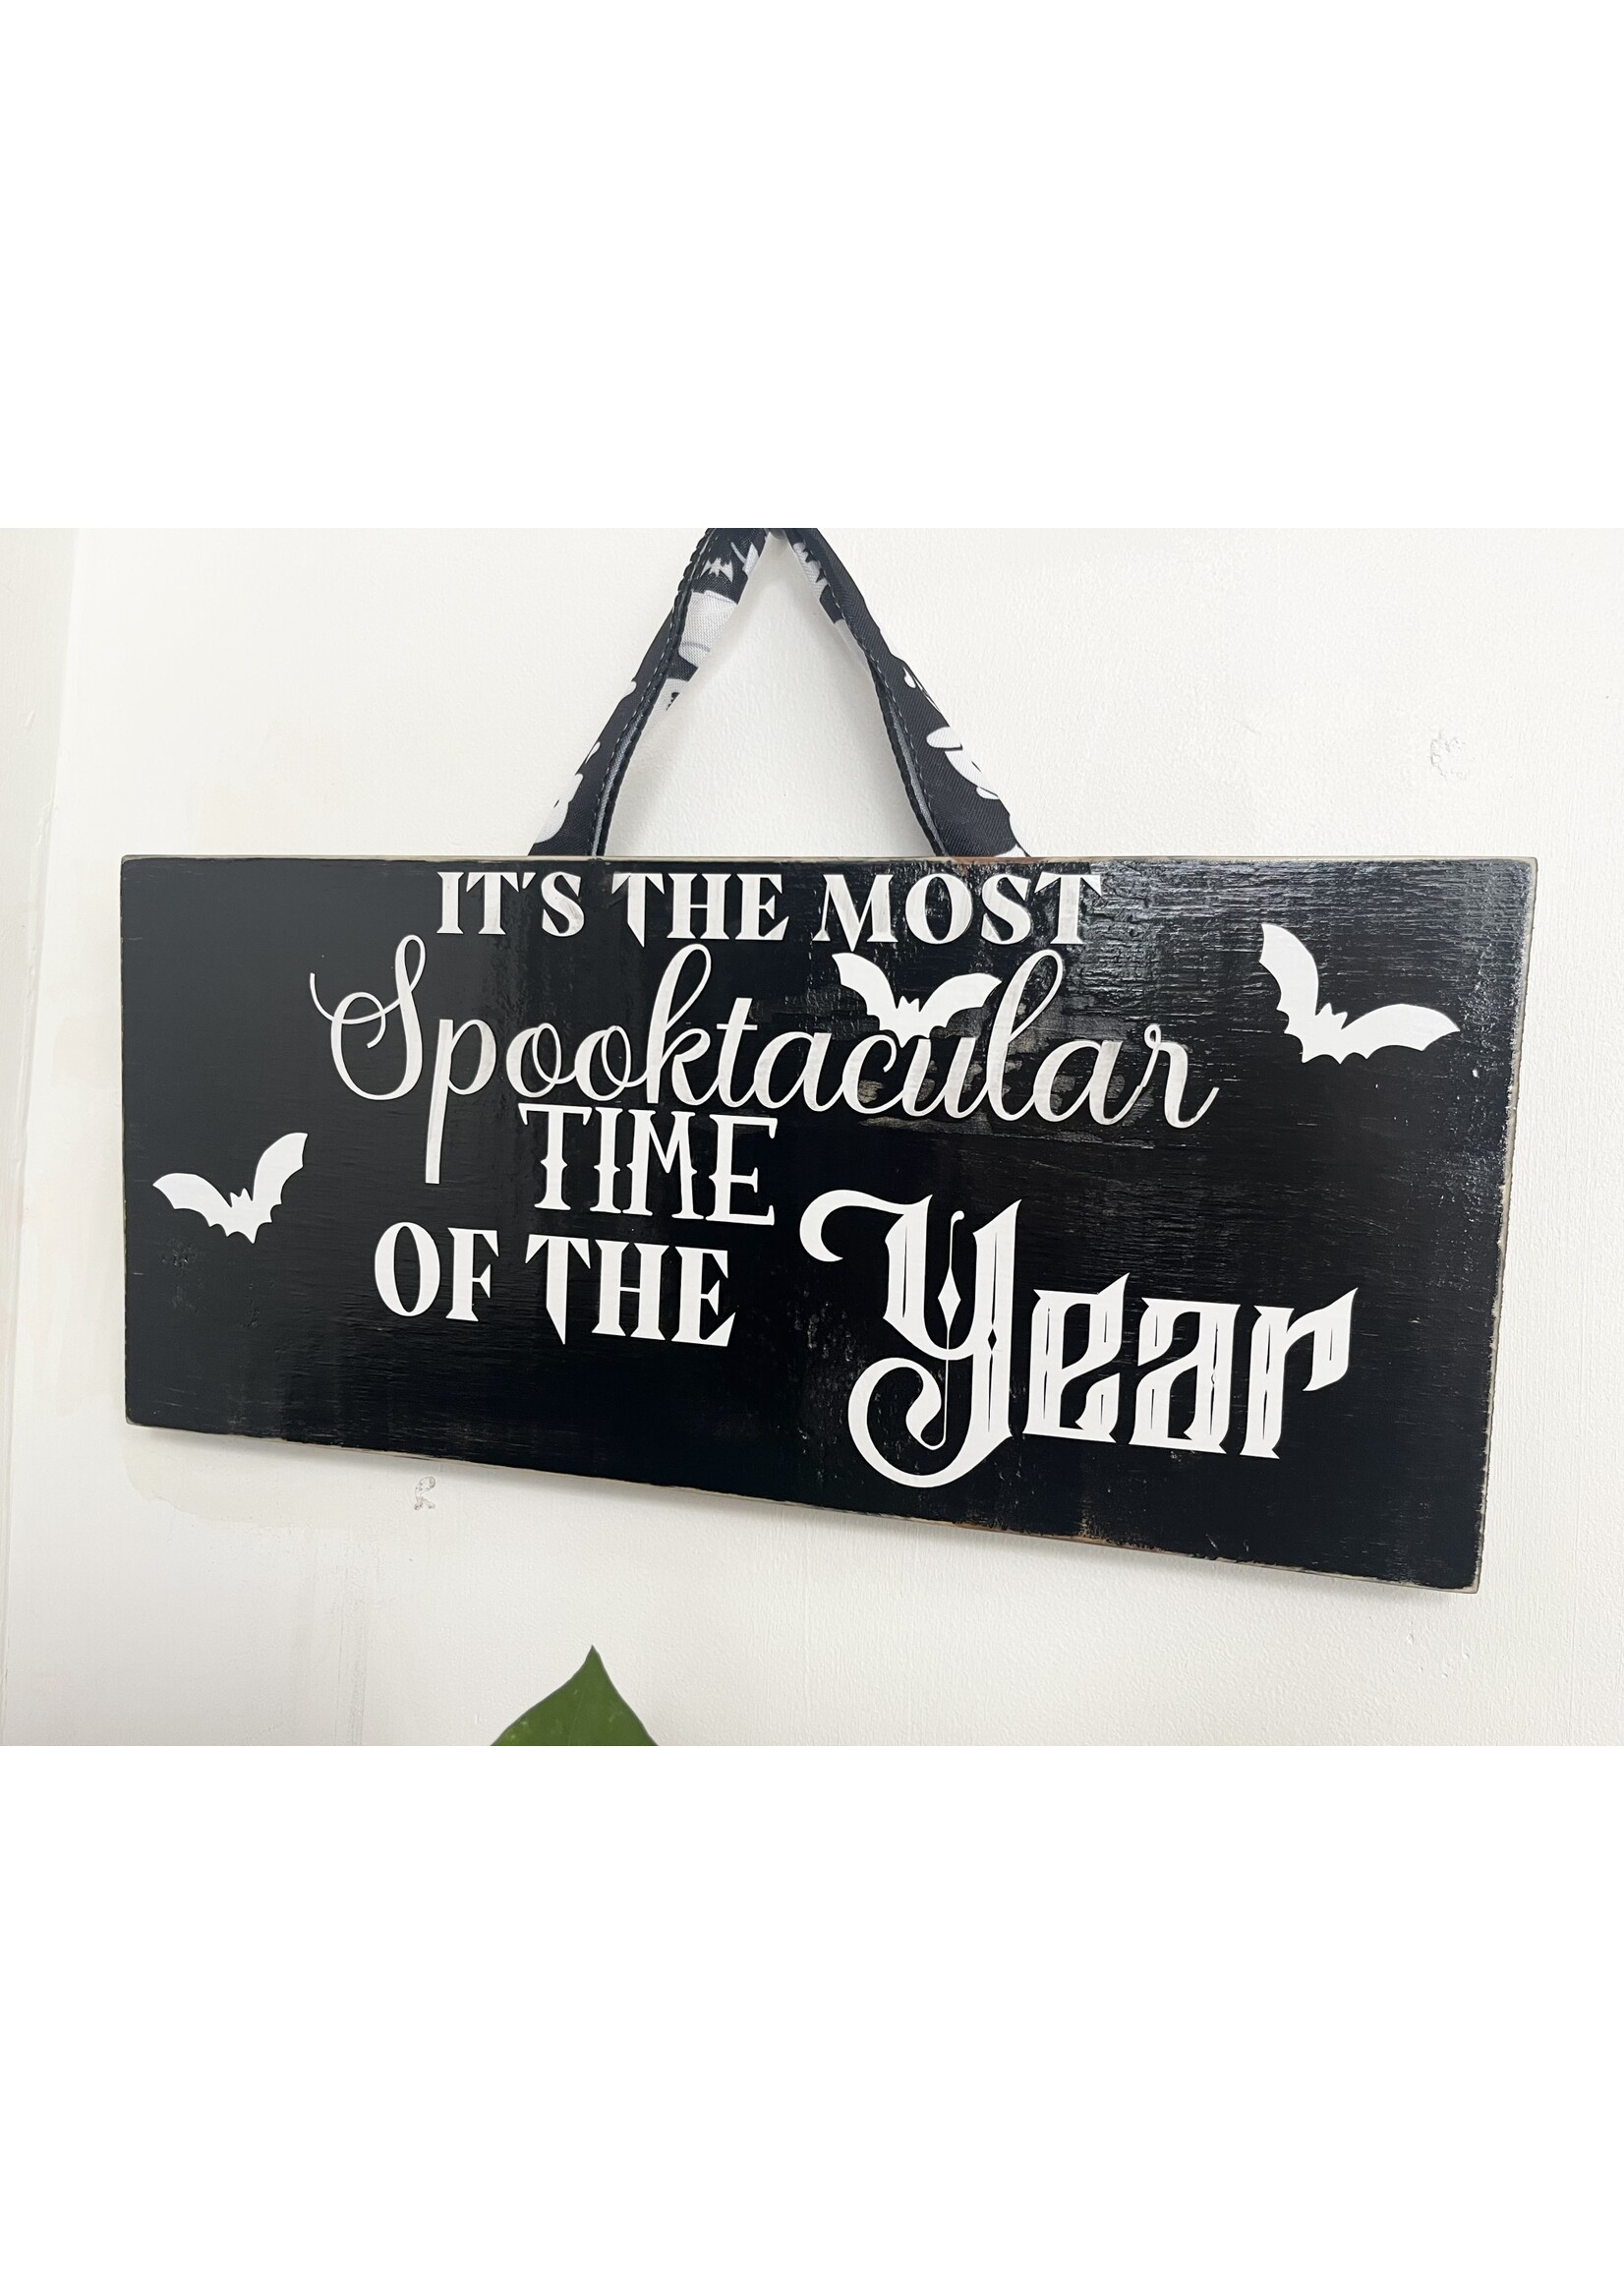 Spooktacular Time of Year wall sign